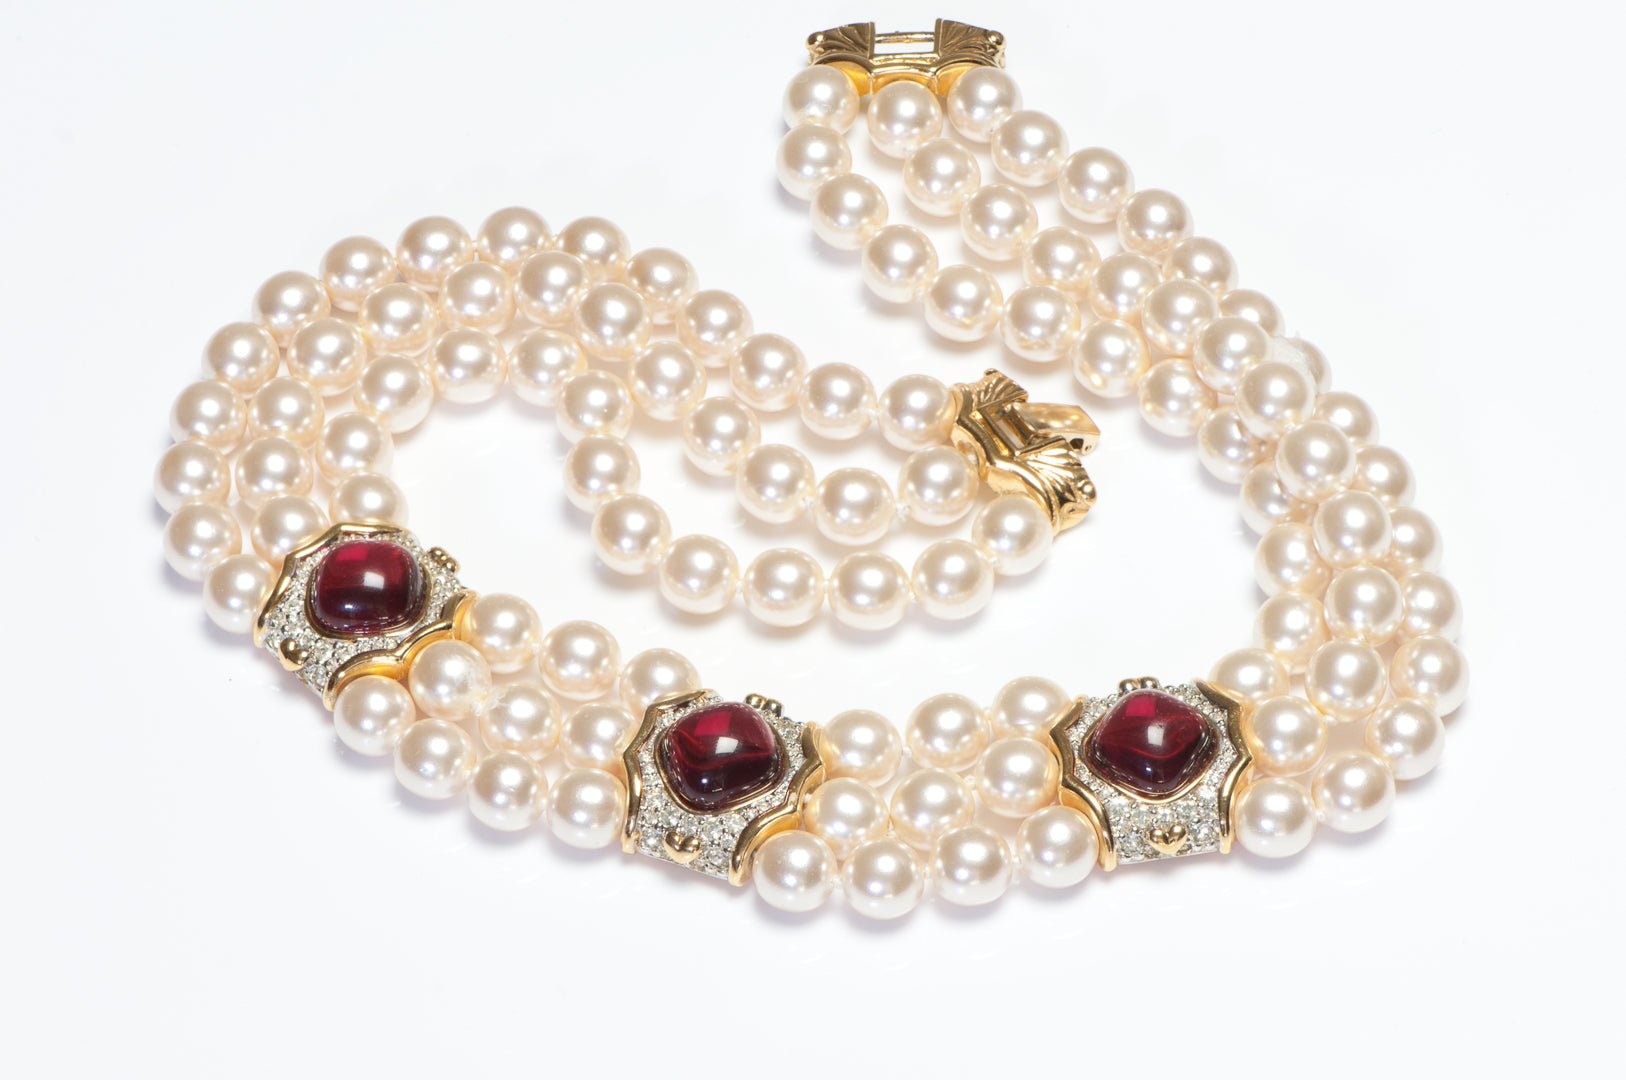 Vintage Nina Ricci Couture Mughal Style Pink Cabochon Glass Pearl Collar Necklace